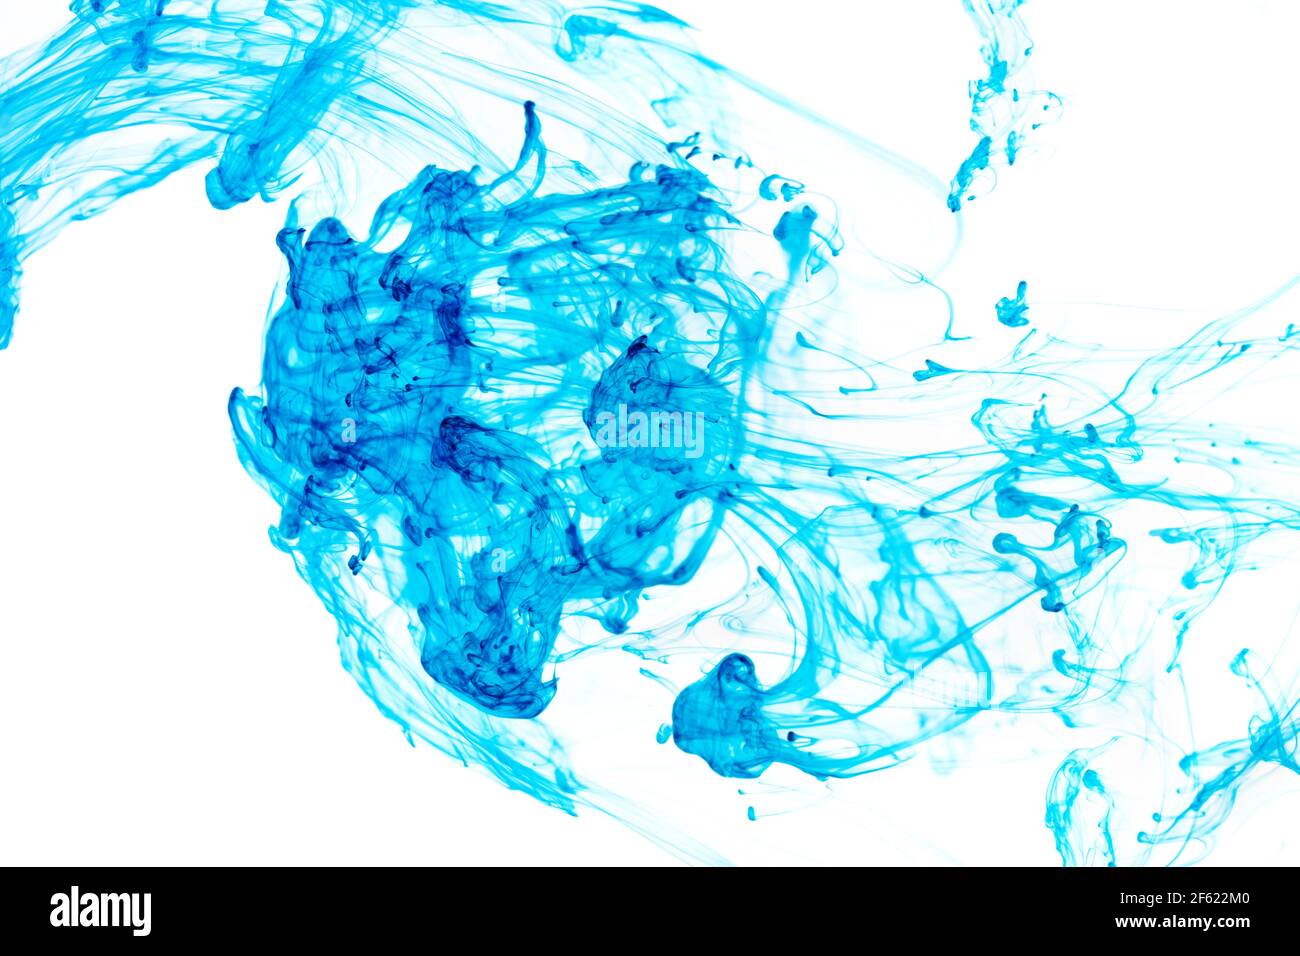 Water pollution Cut Out Stock Images & Pictures - Alamy